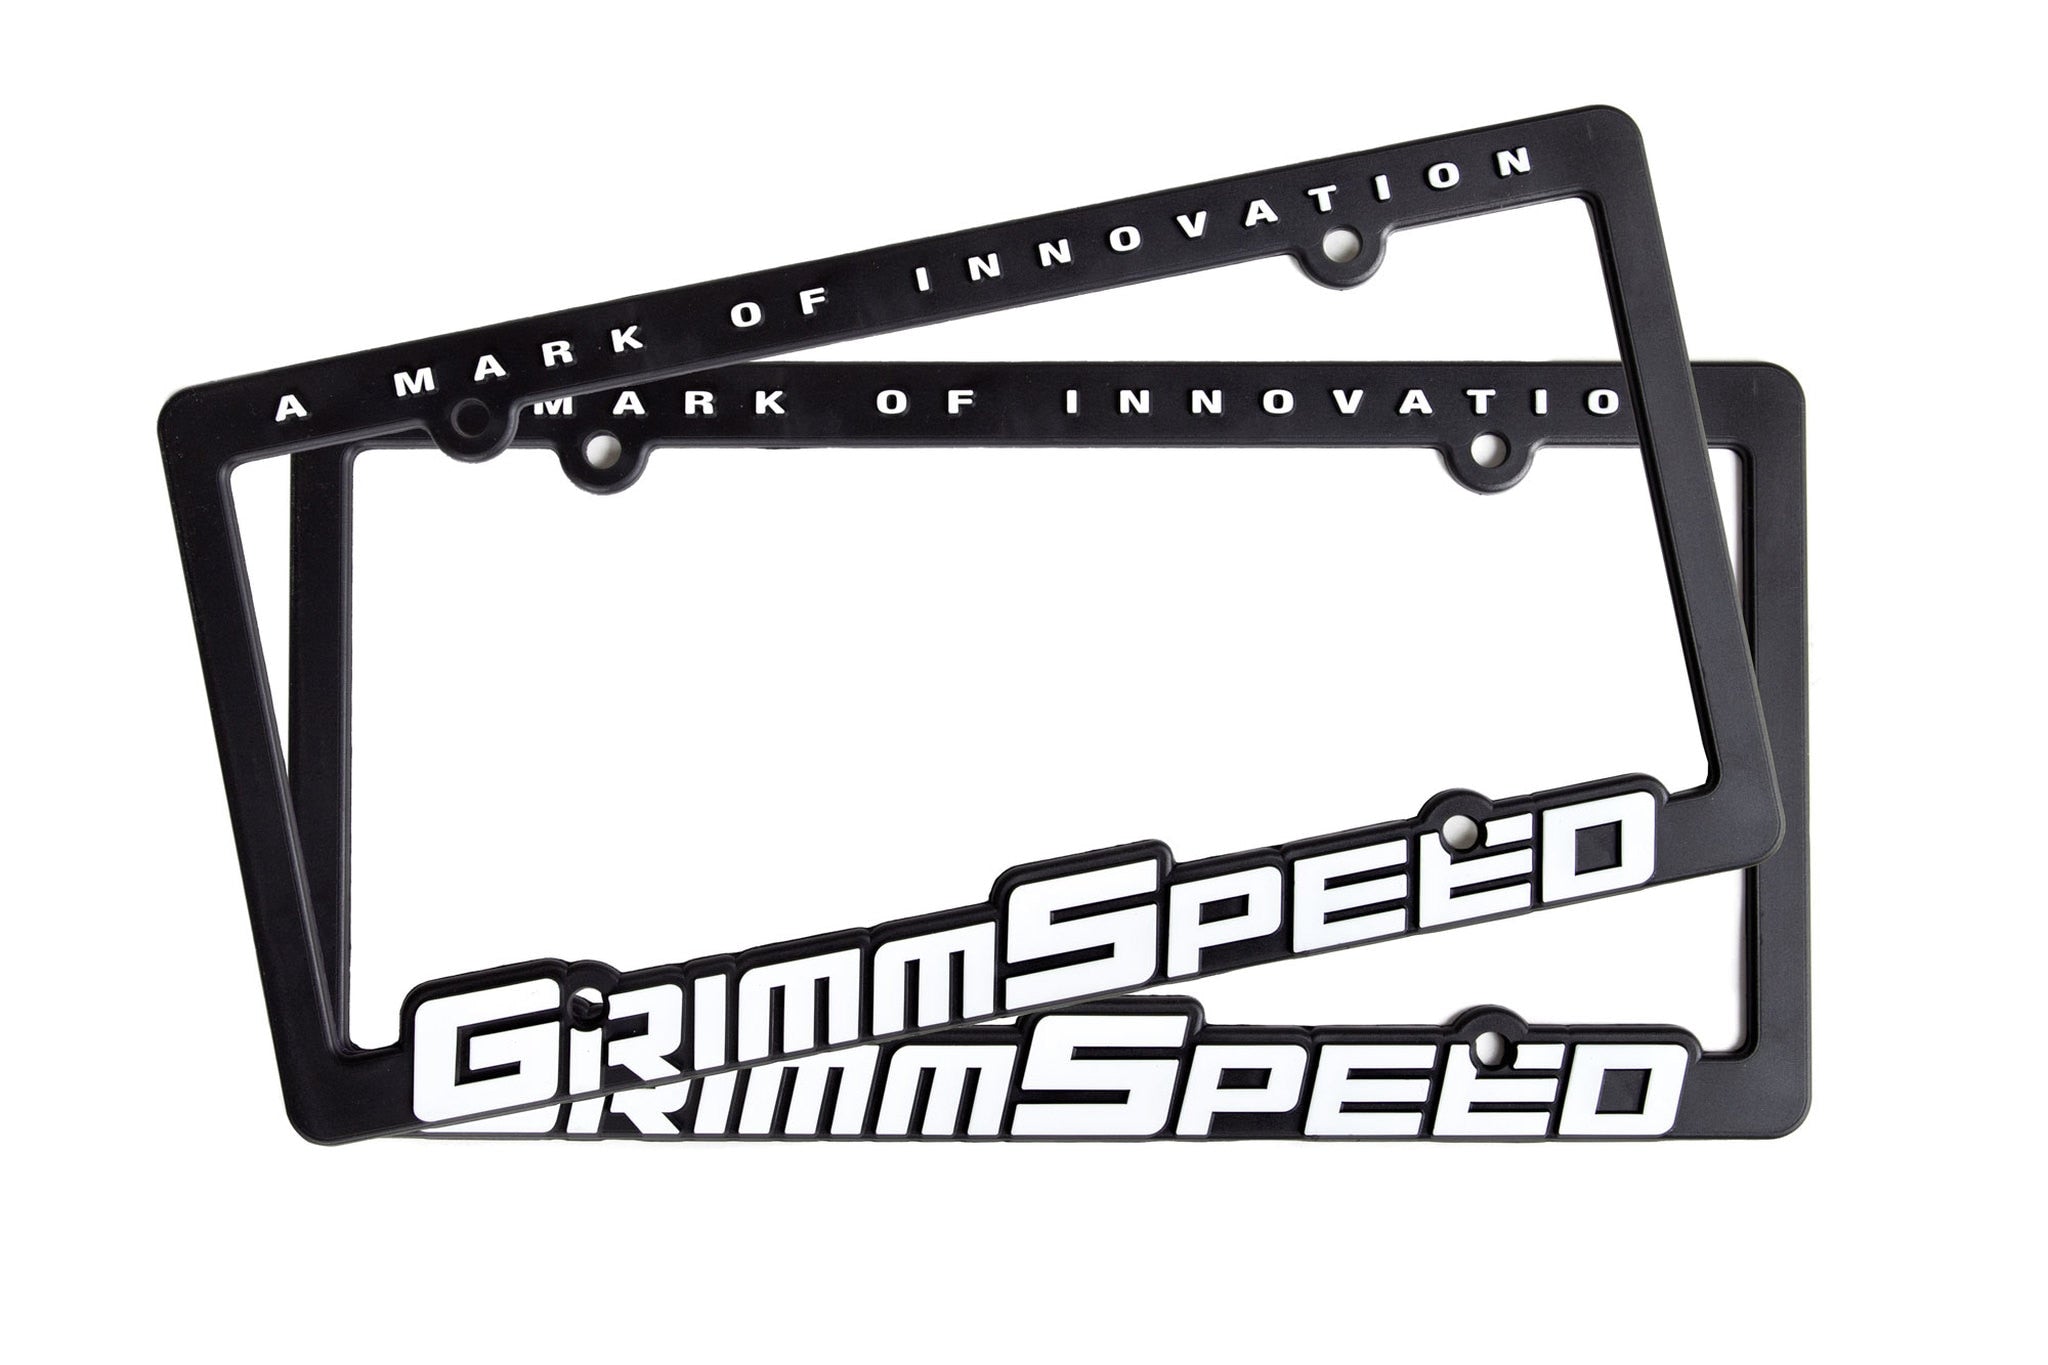 License Plate Frames - GrimmSpeed Text (Pair)